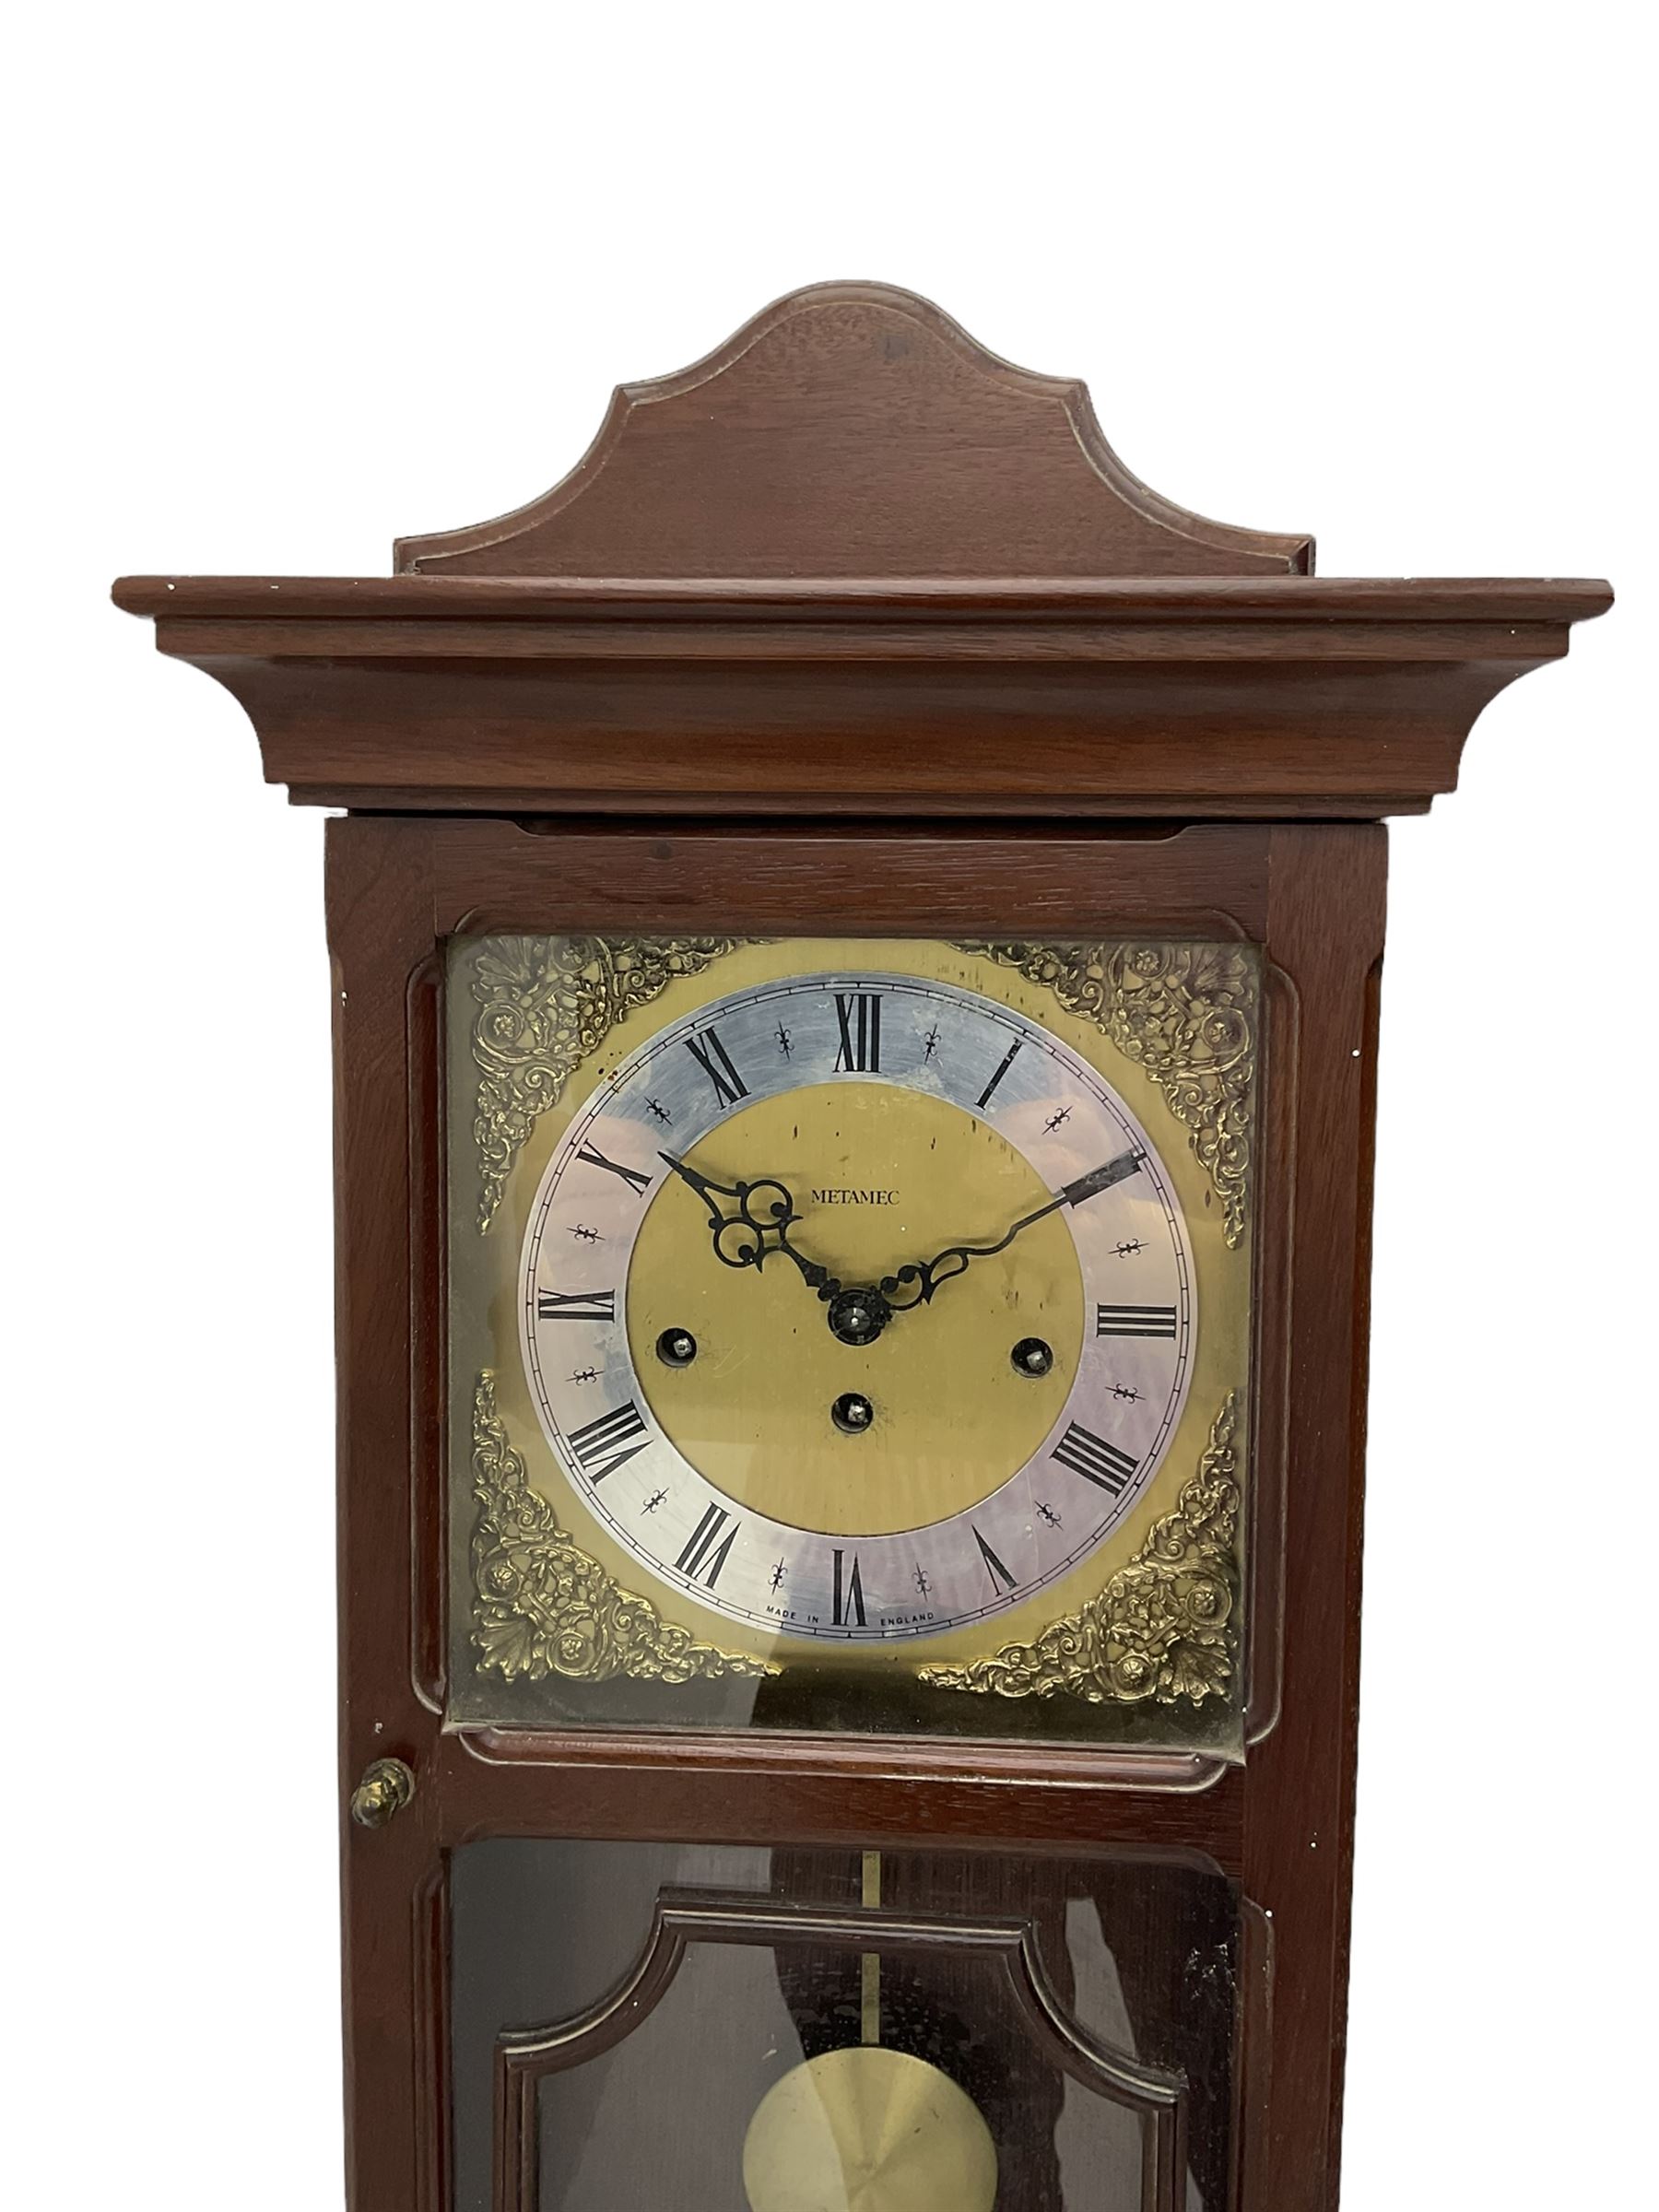 A 20th century wall clock in a simulated mahogany case with a two-part glazed door - Image 3 of 3